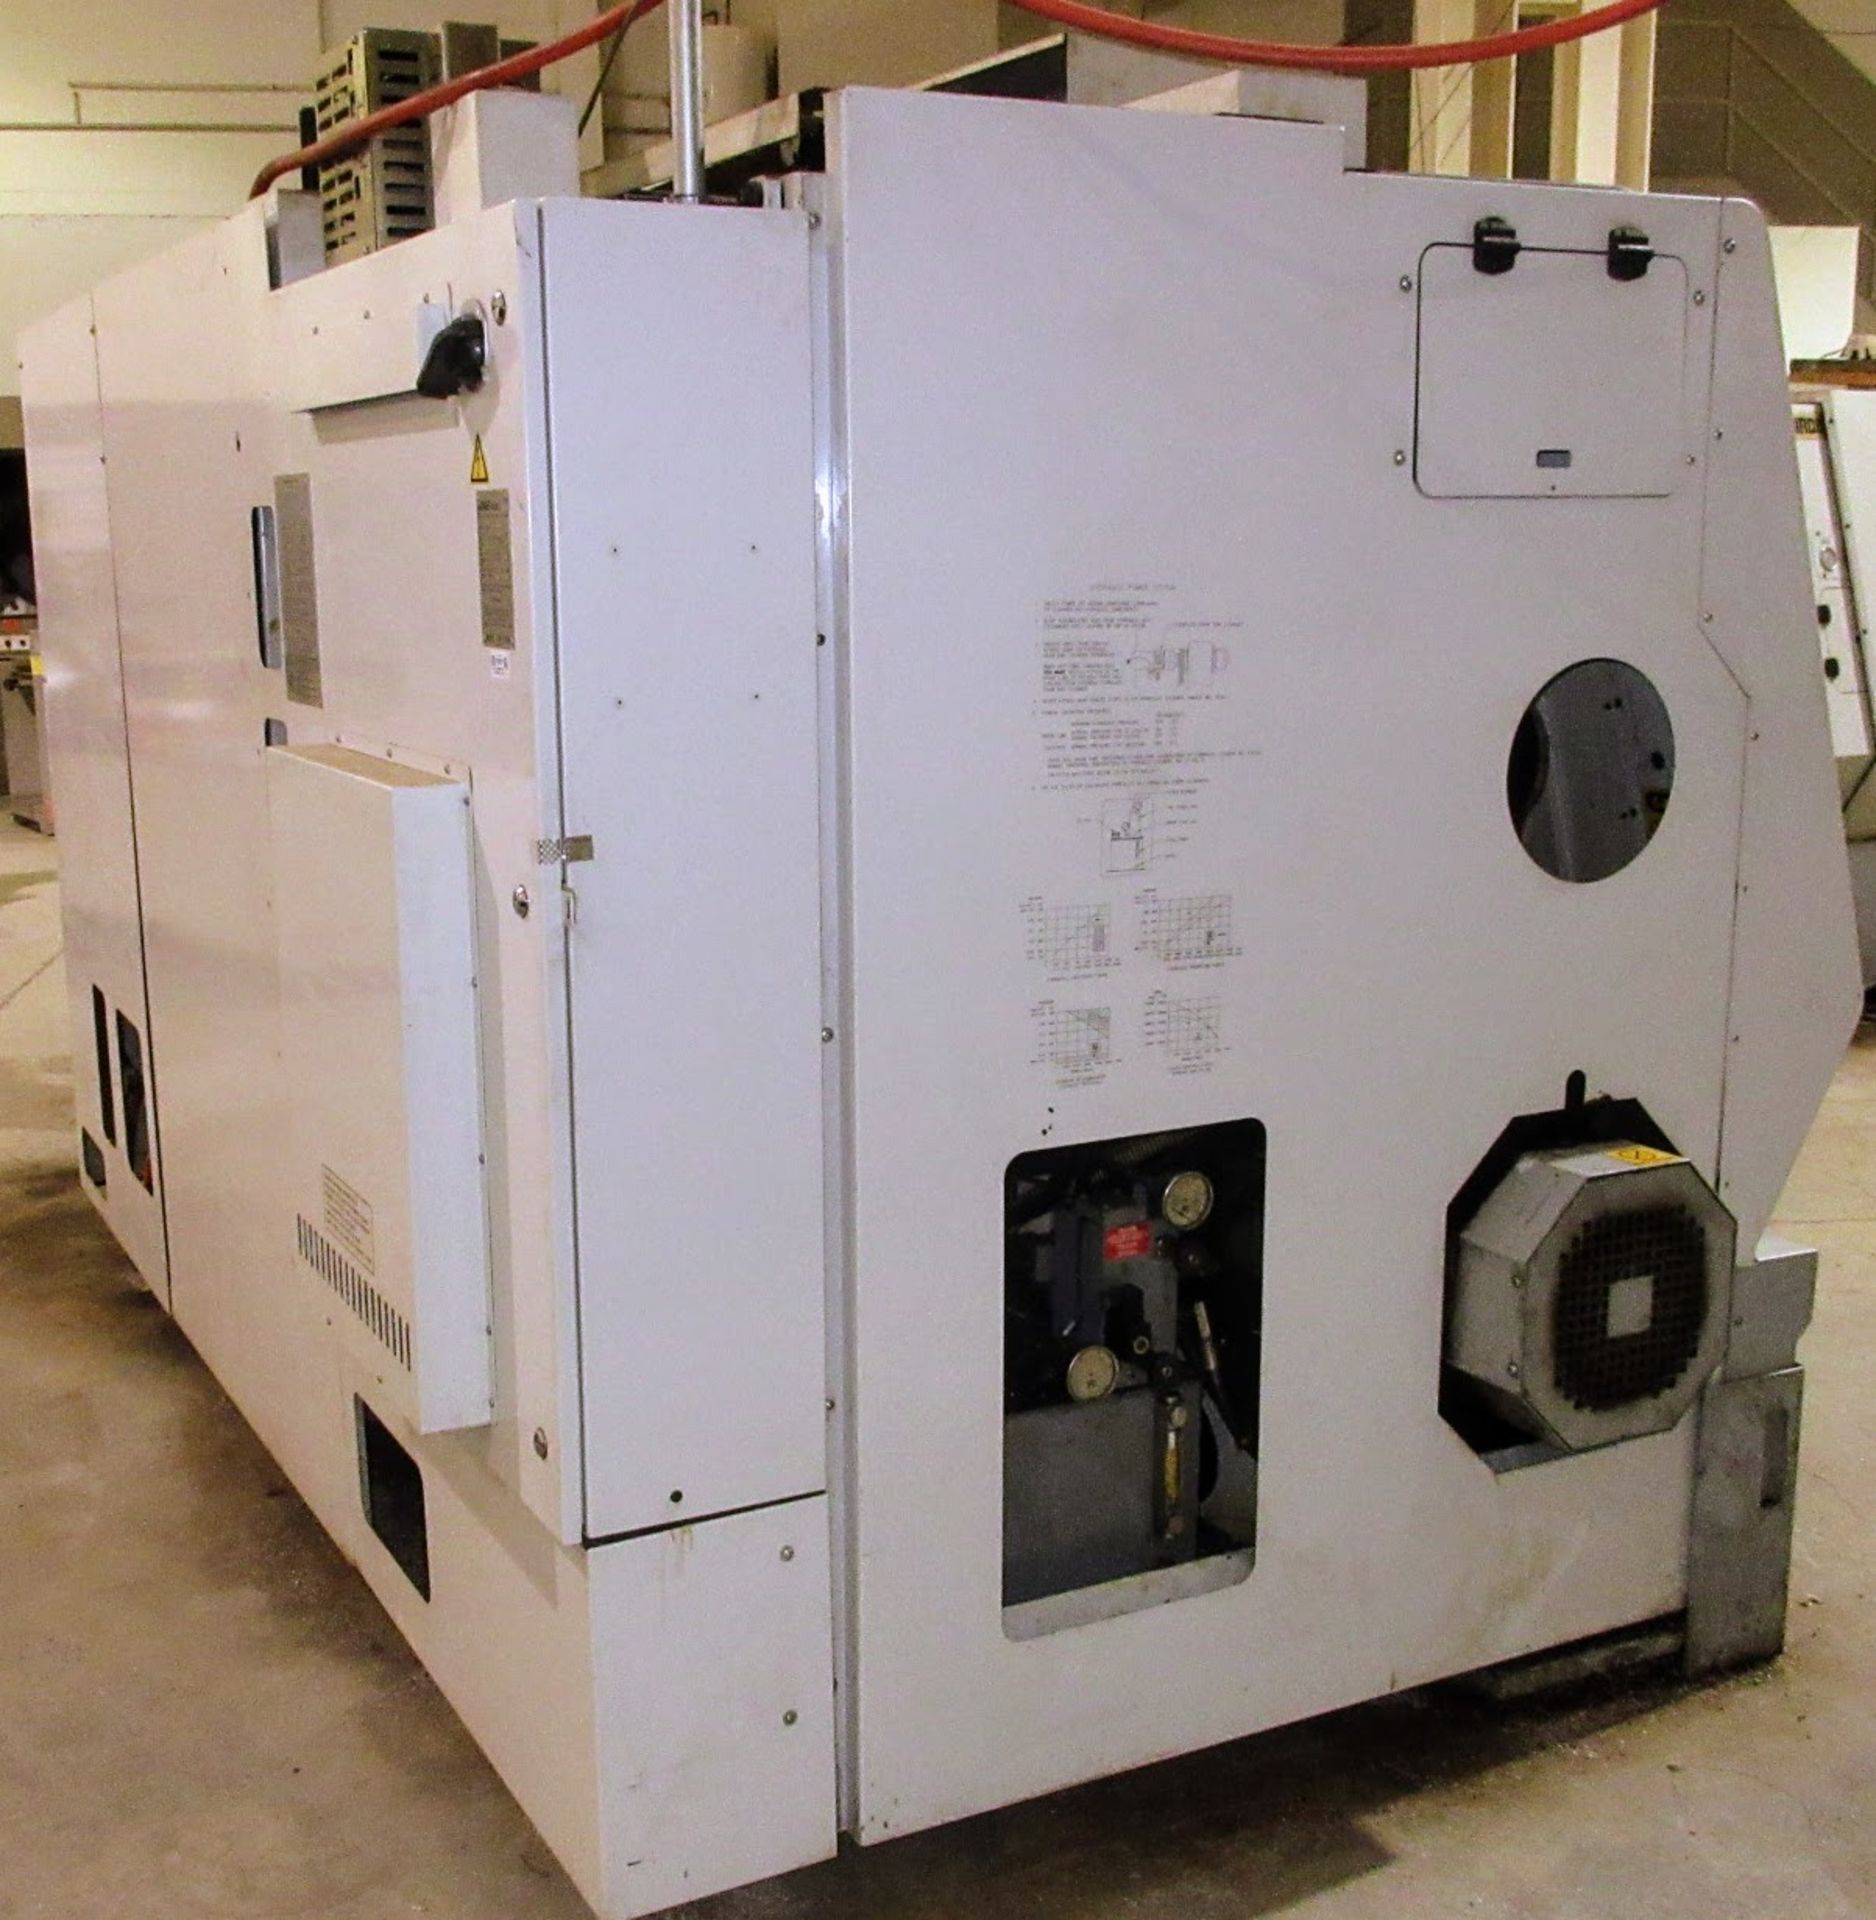 2000 HAAS SL-30T CNC LATHE, S/N 62806, CNC CONTROL, 10” 3-JAW CHUCK, TOOL PRESETTER, 12-STATION - Image 21 of 23